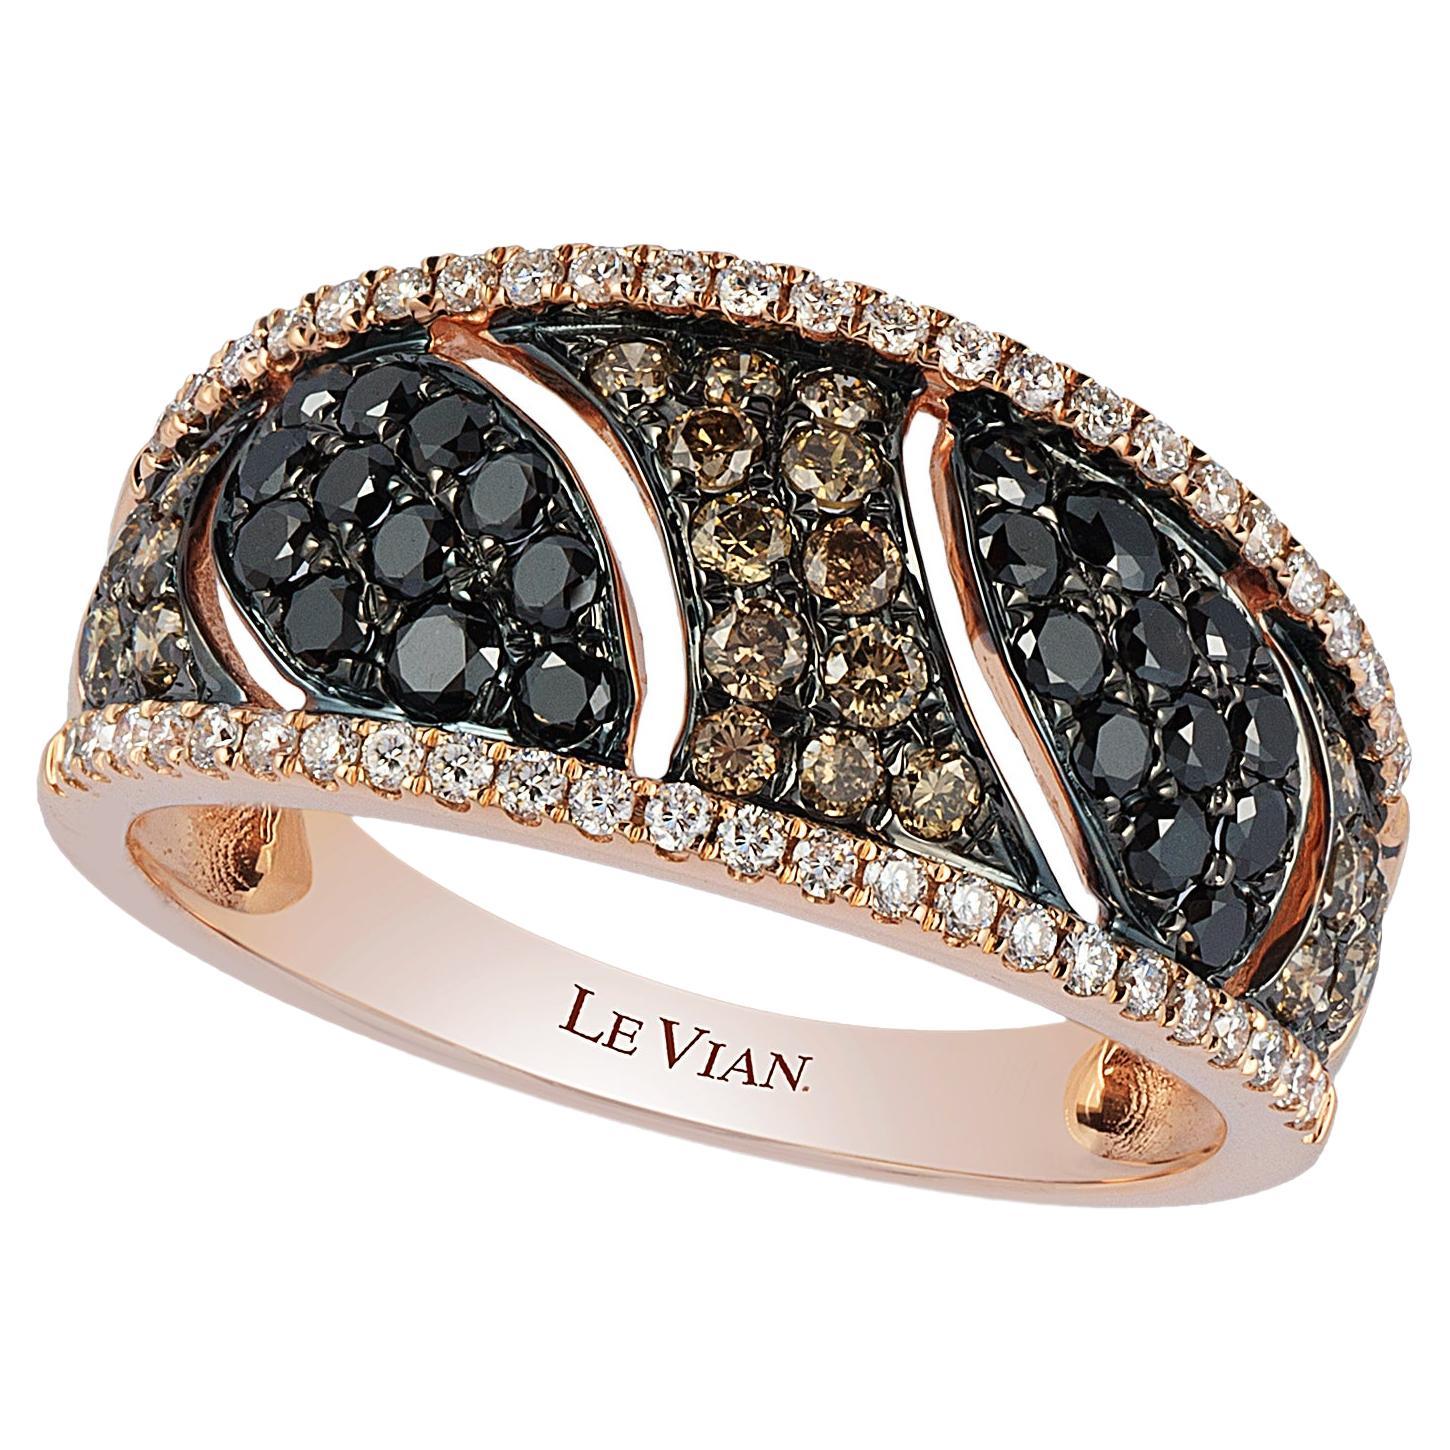 Levian Ring 7 8 Cts Black Chocolate and White Natural Diamonds in 14K Rose Gold